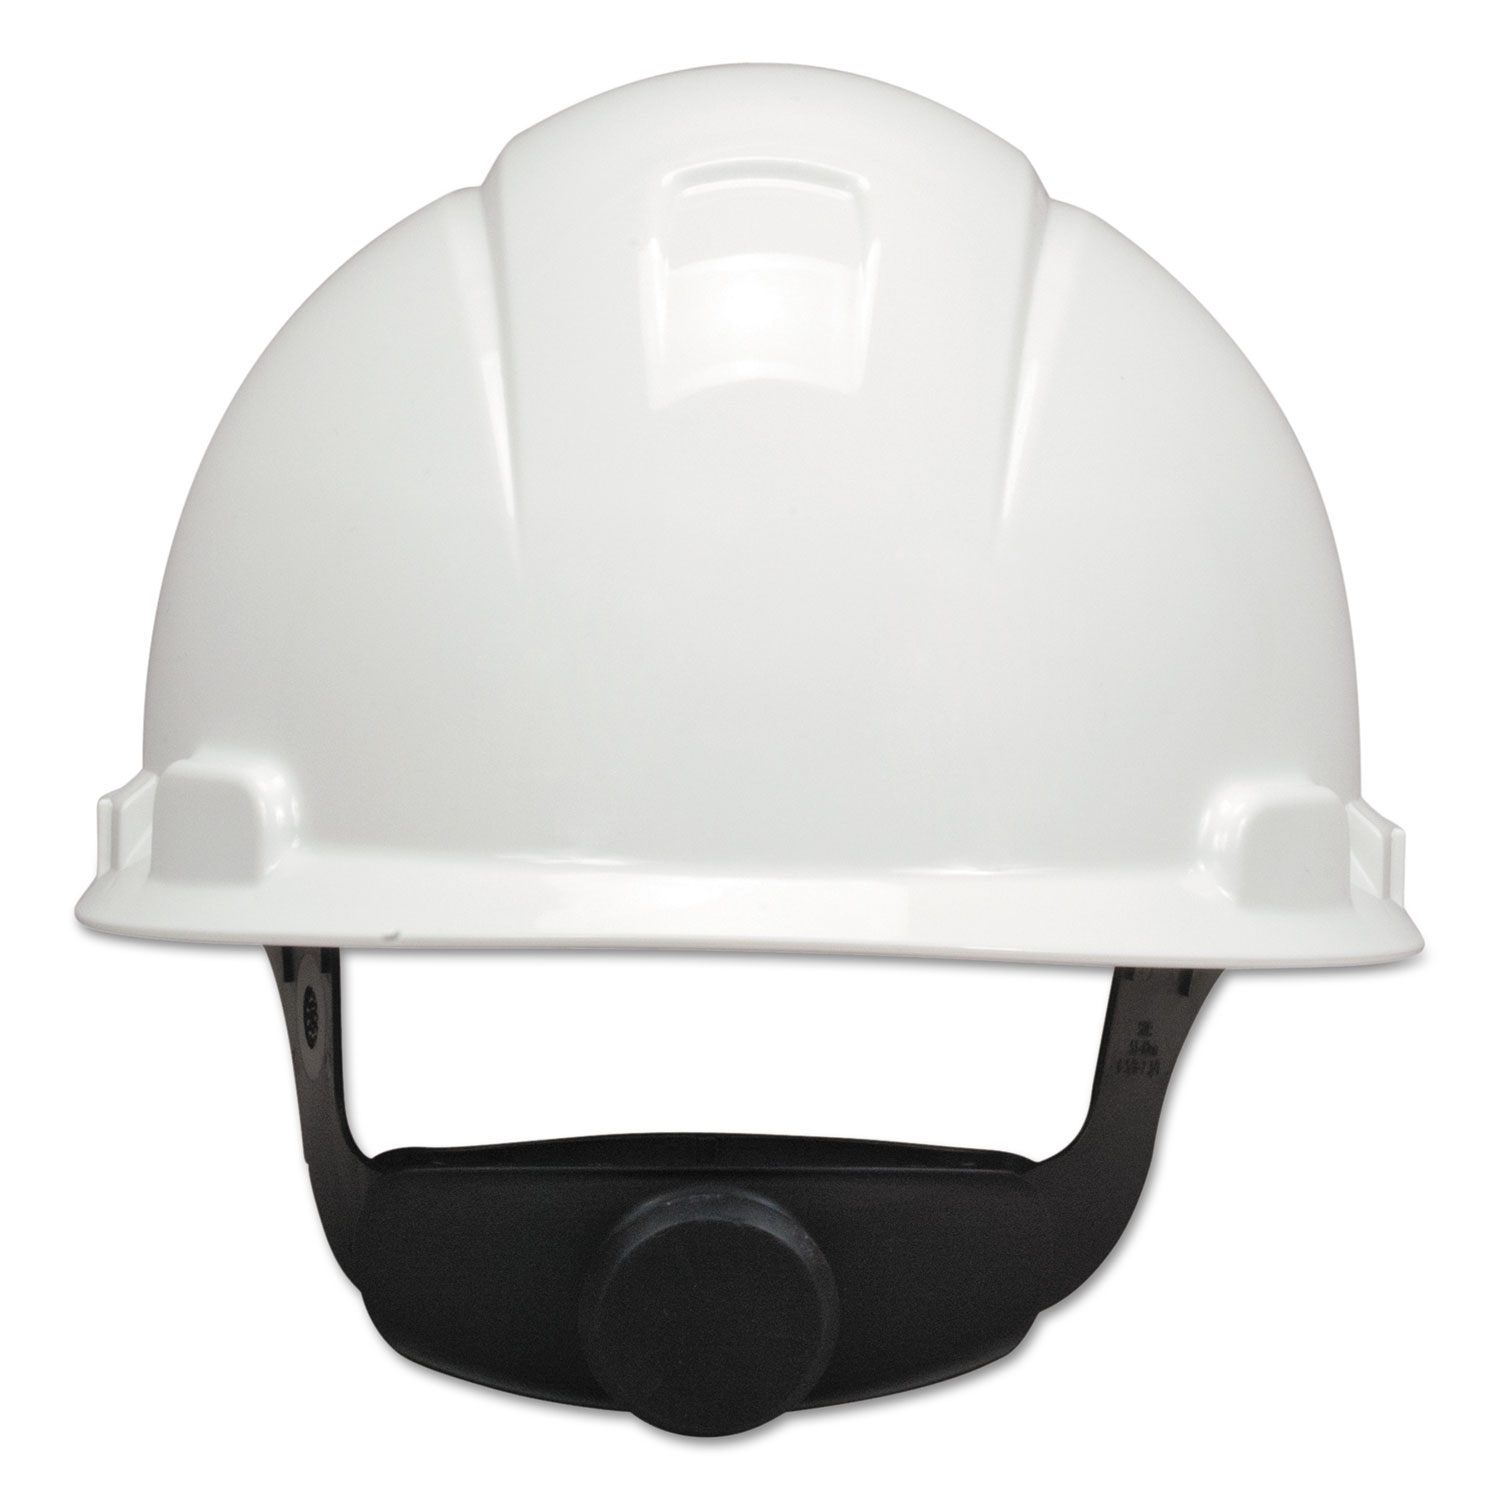 H-700 Series Hard Hat with 4 Point Ratchet Suspension, White